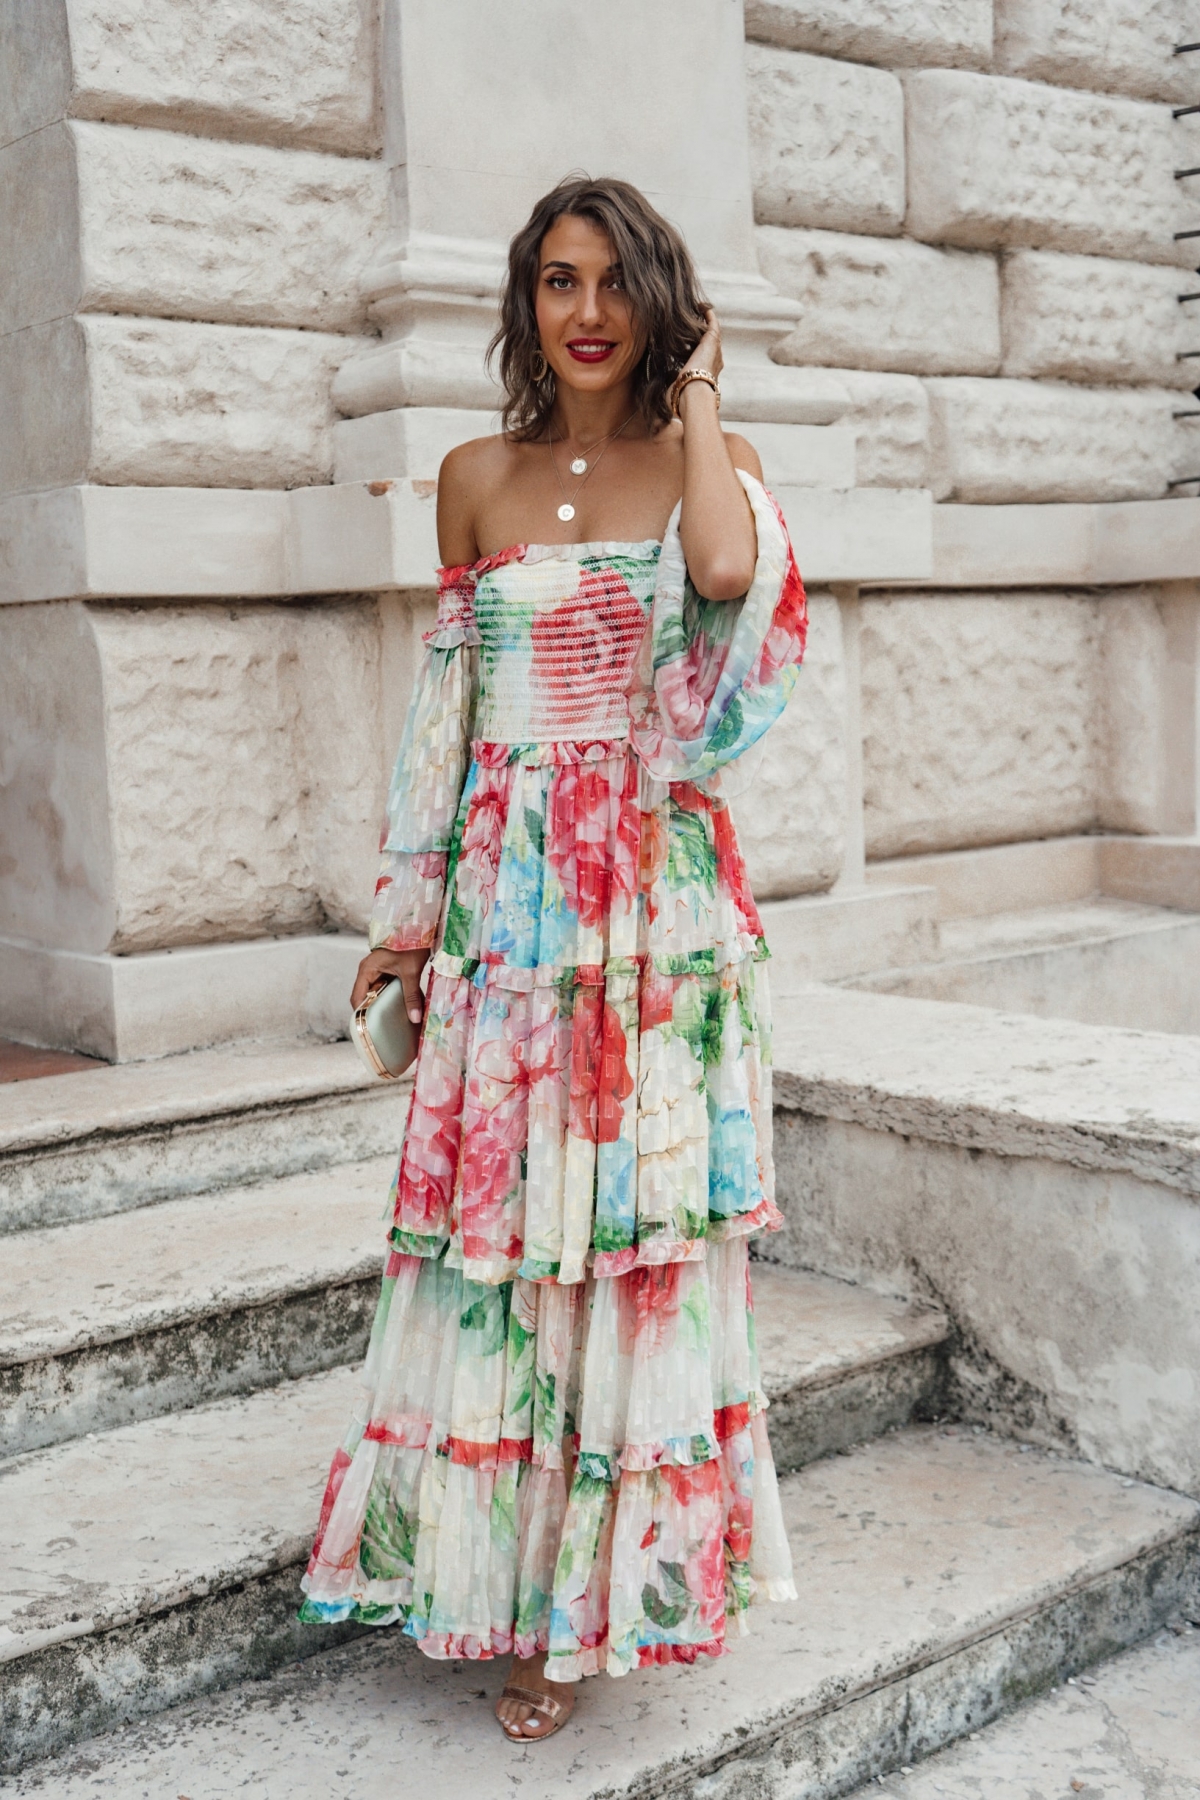 Maxi dress | Welcome to my world